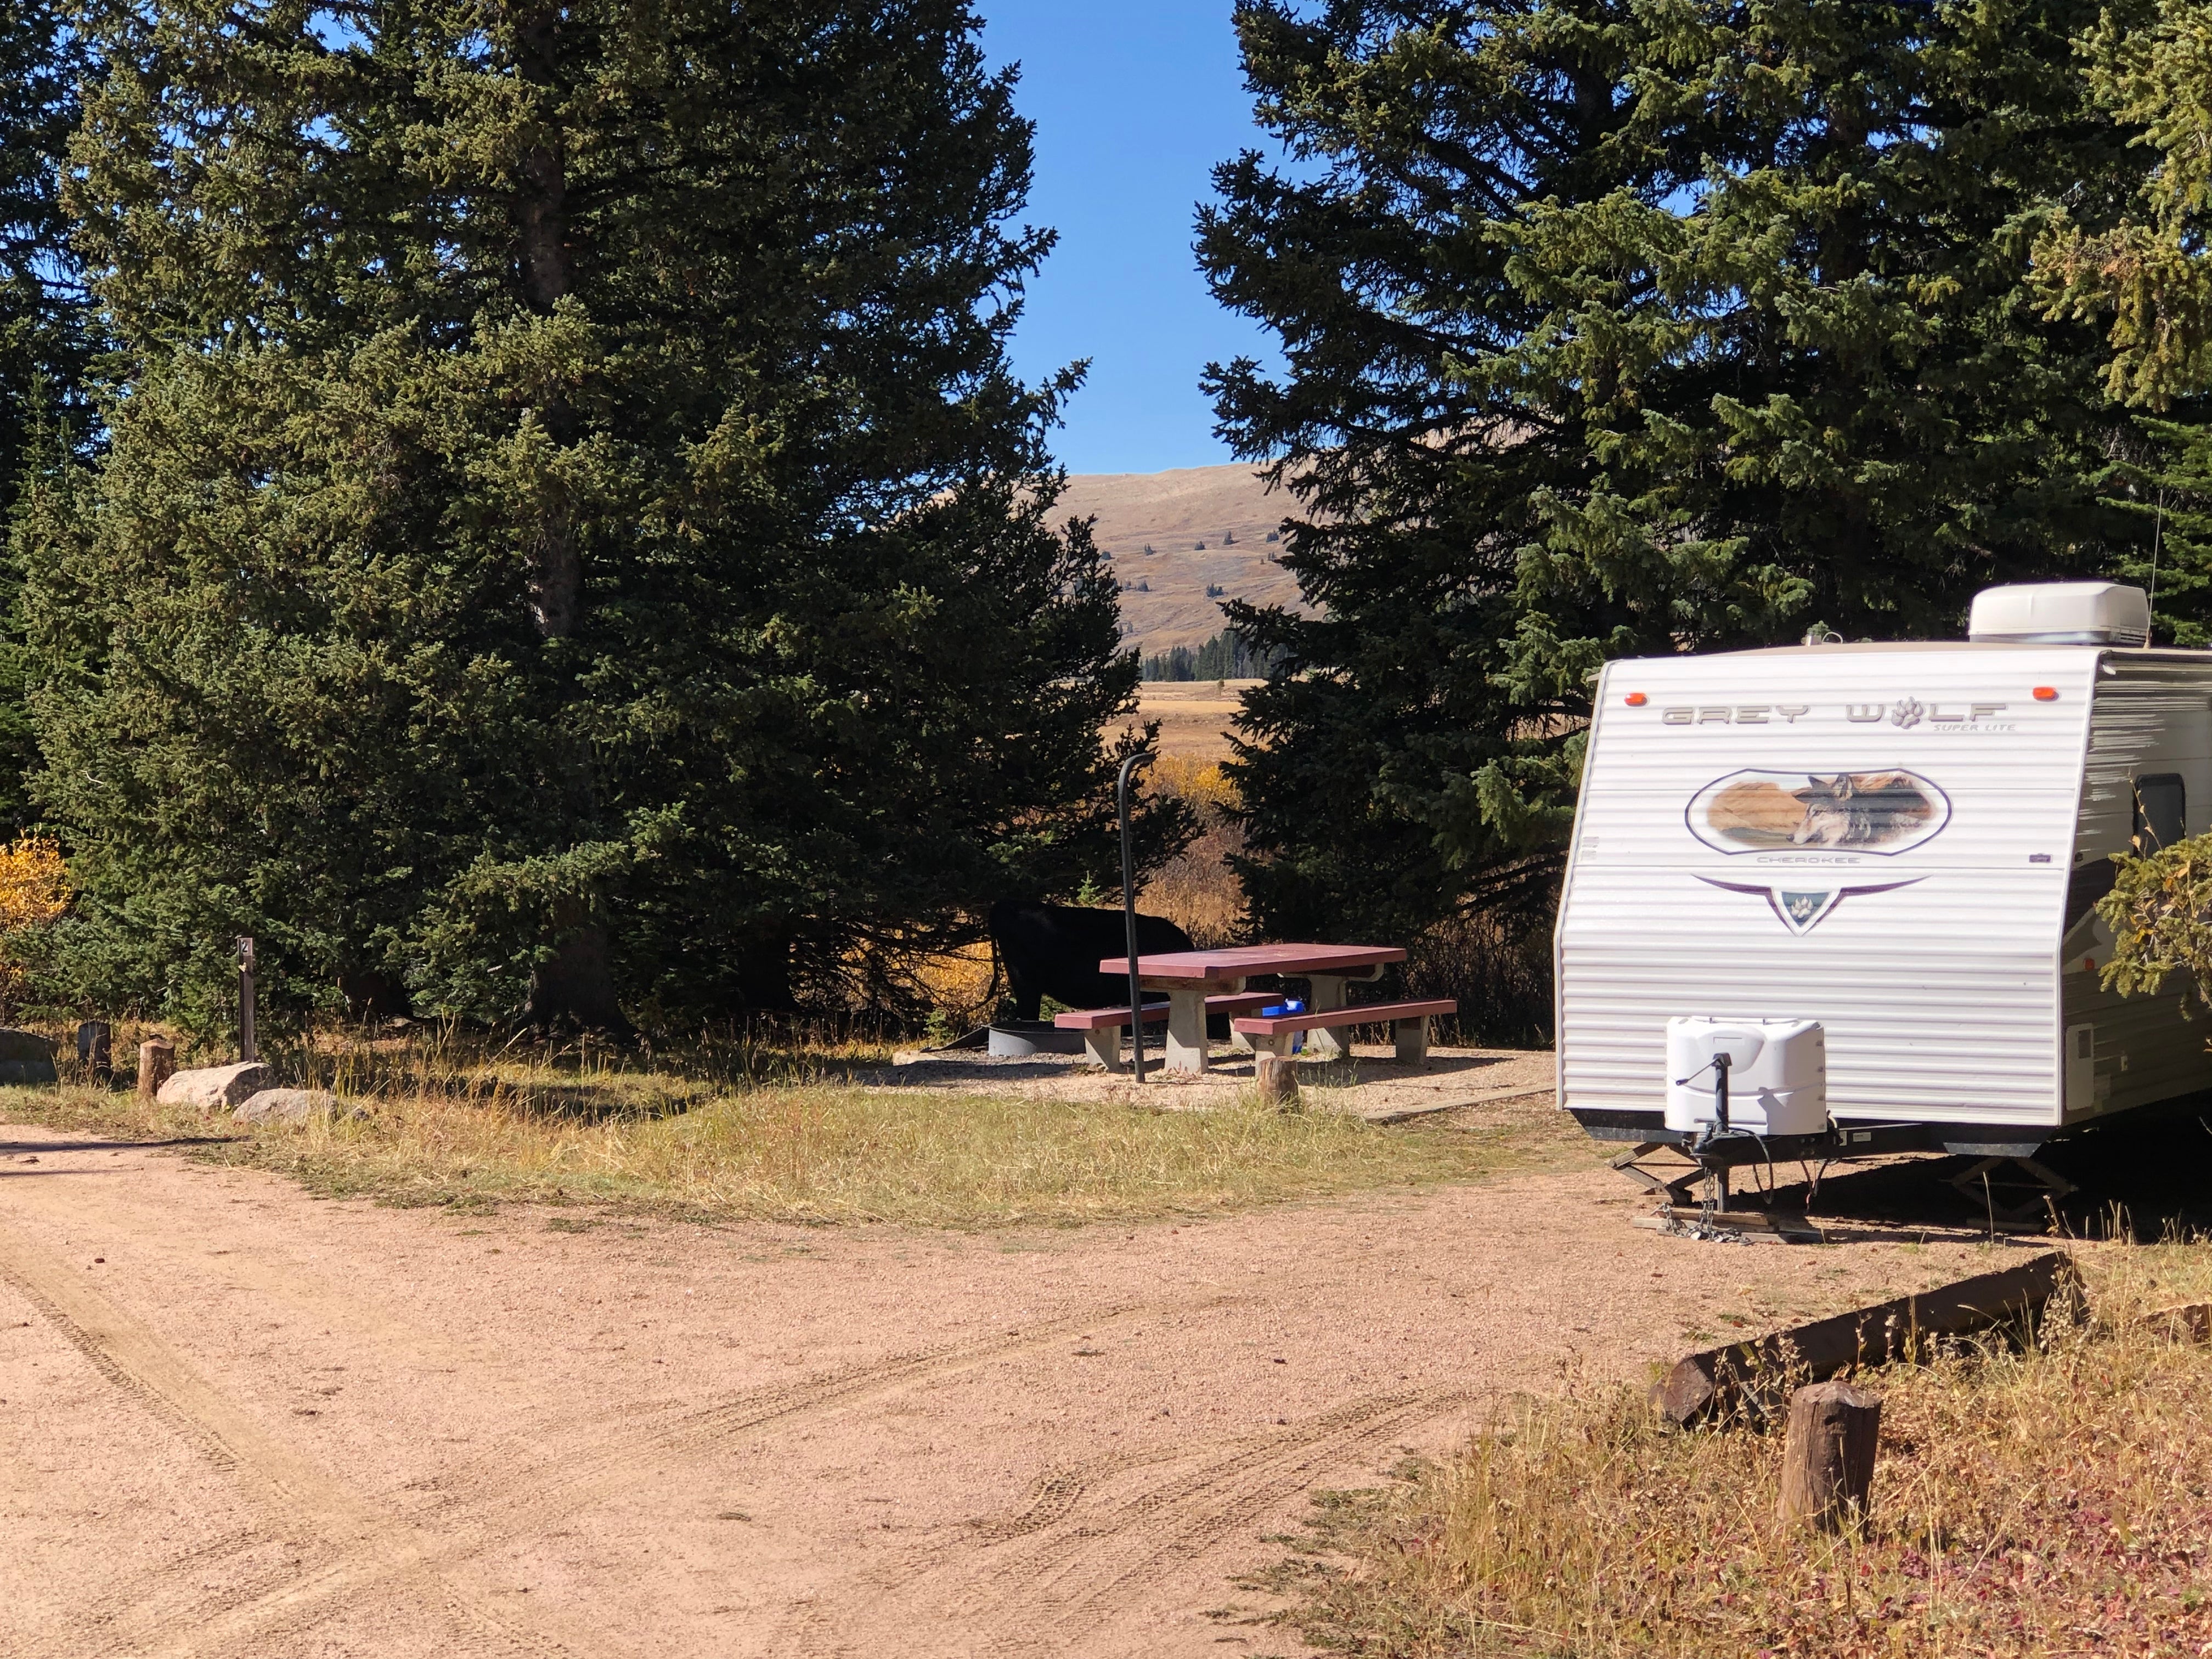 Camper submitted image from Bald Mountain Campground - 1